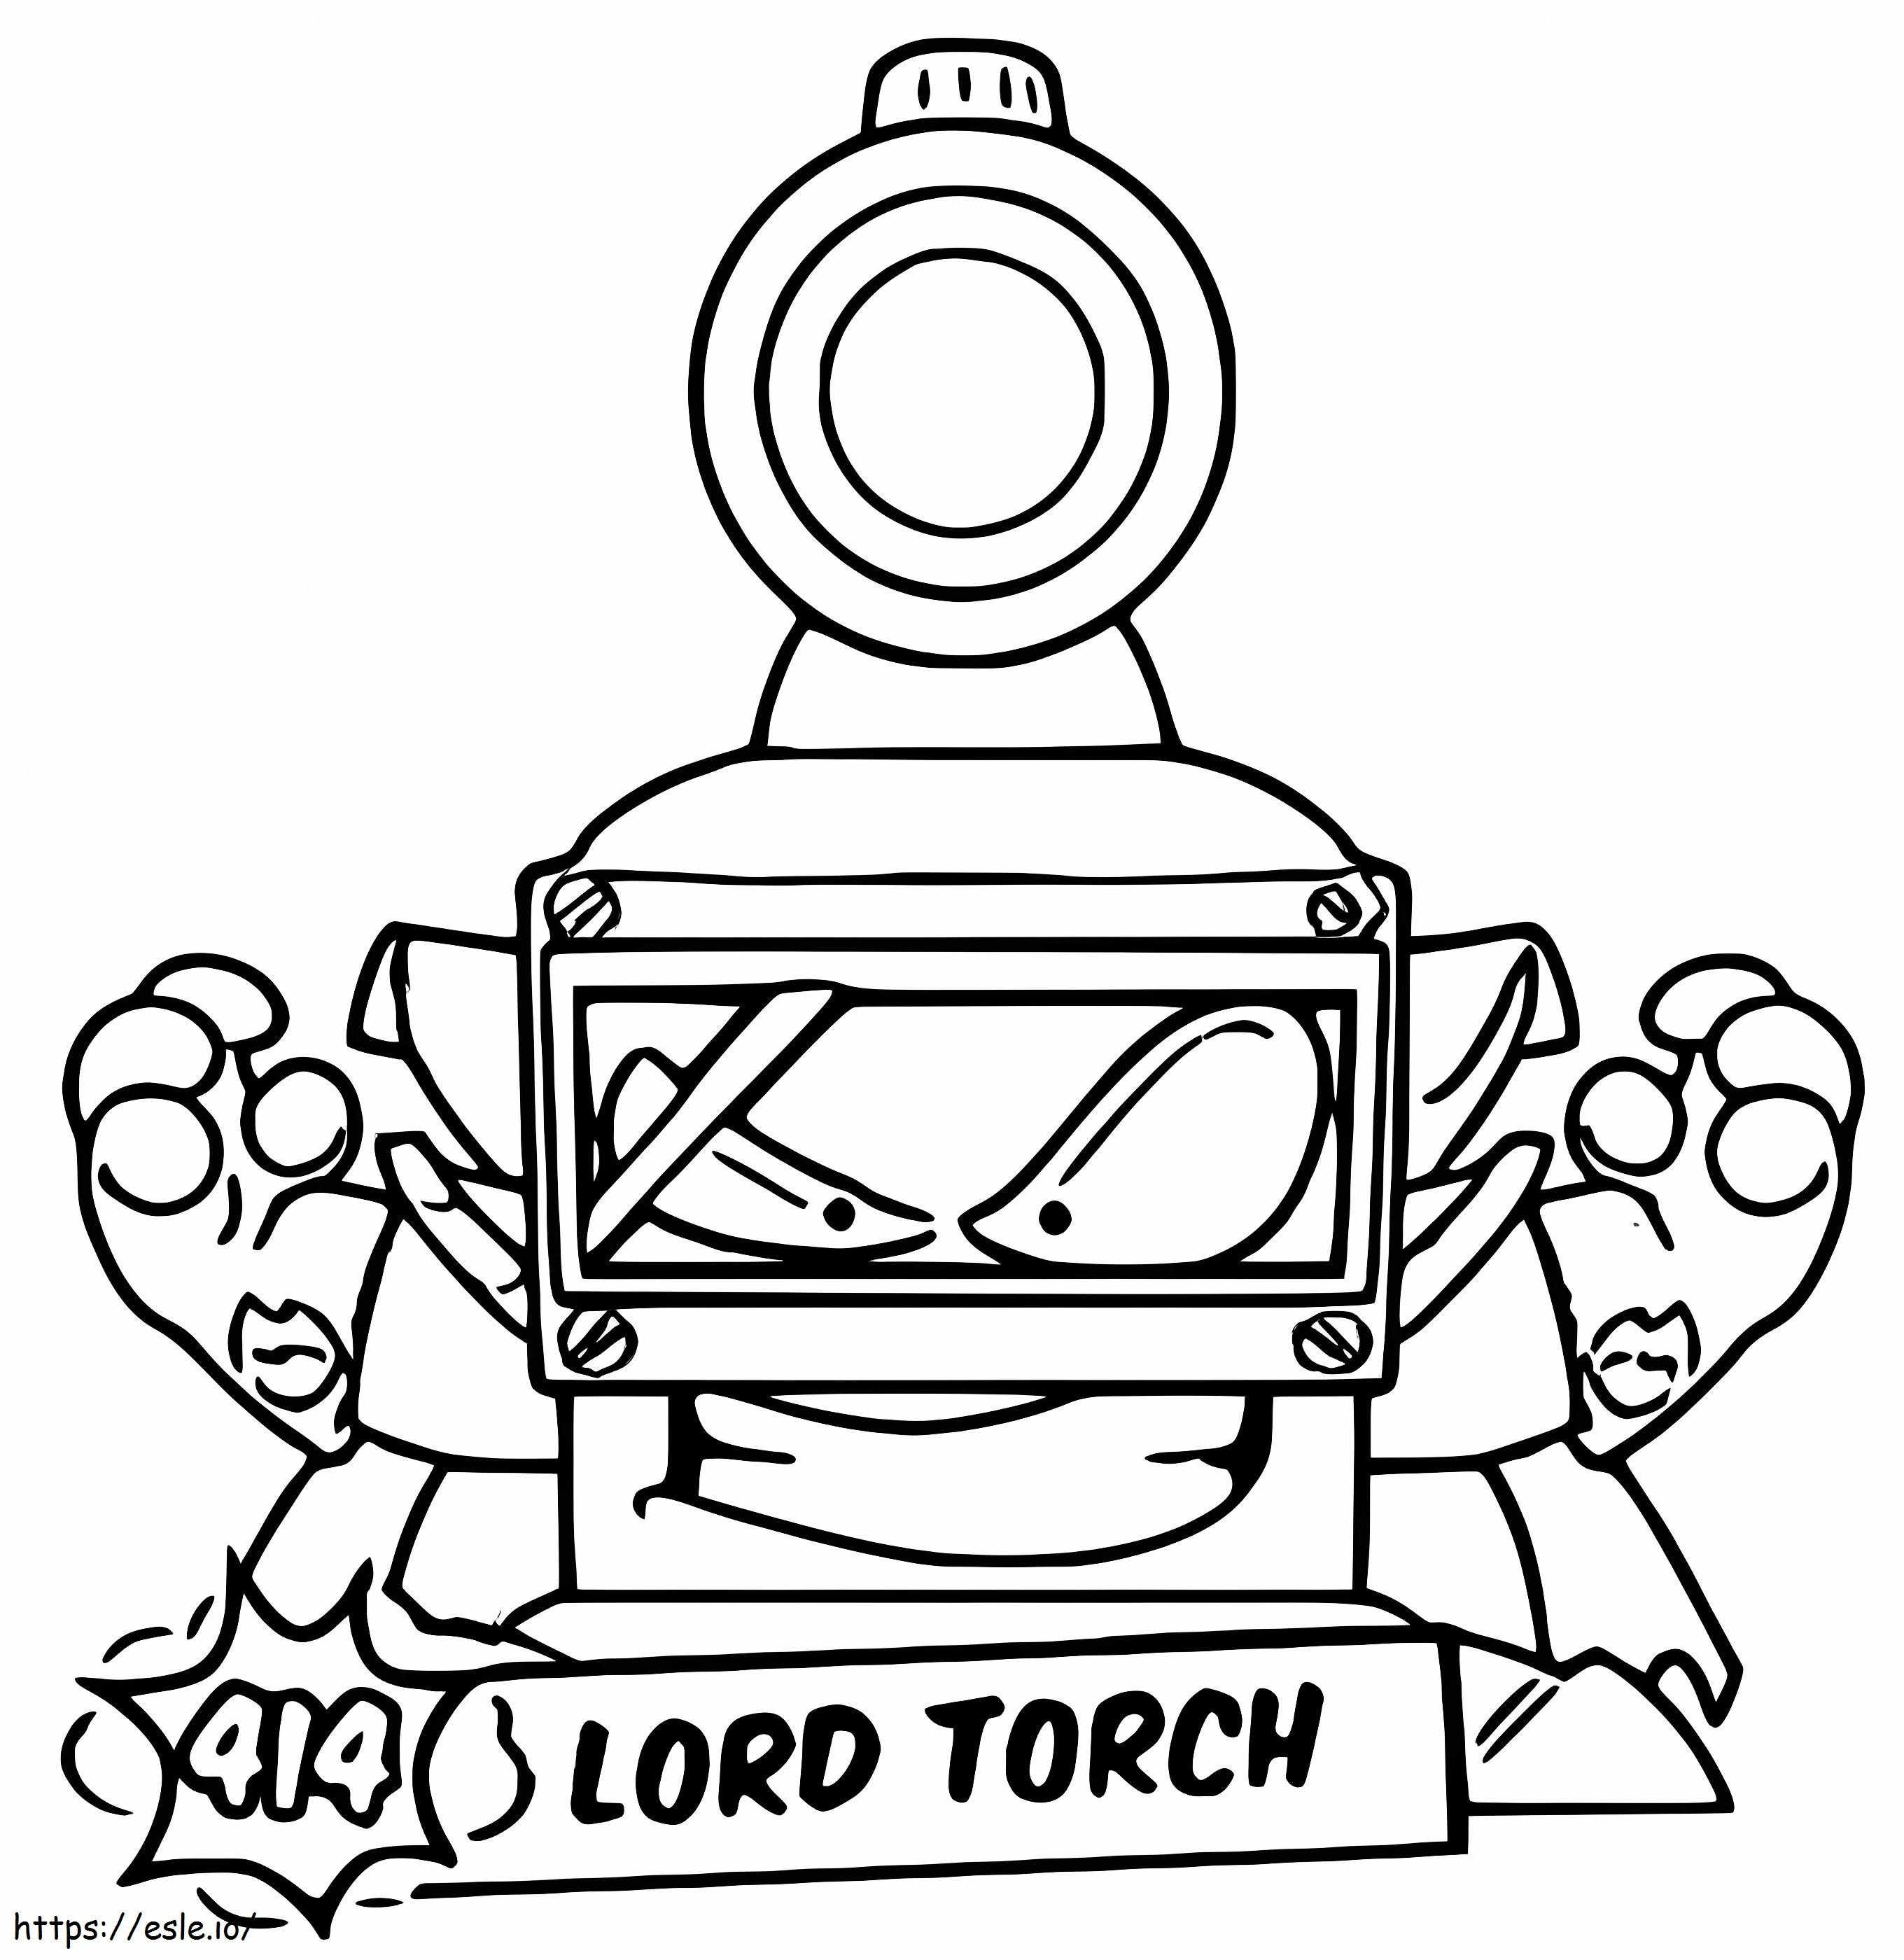 Lord Torch Superzings coloring page